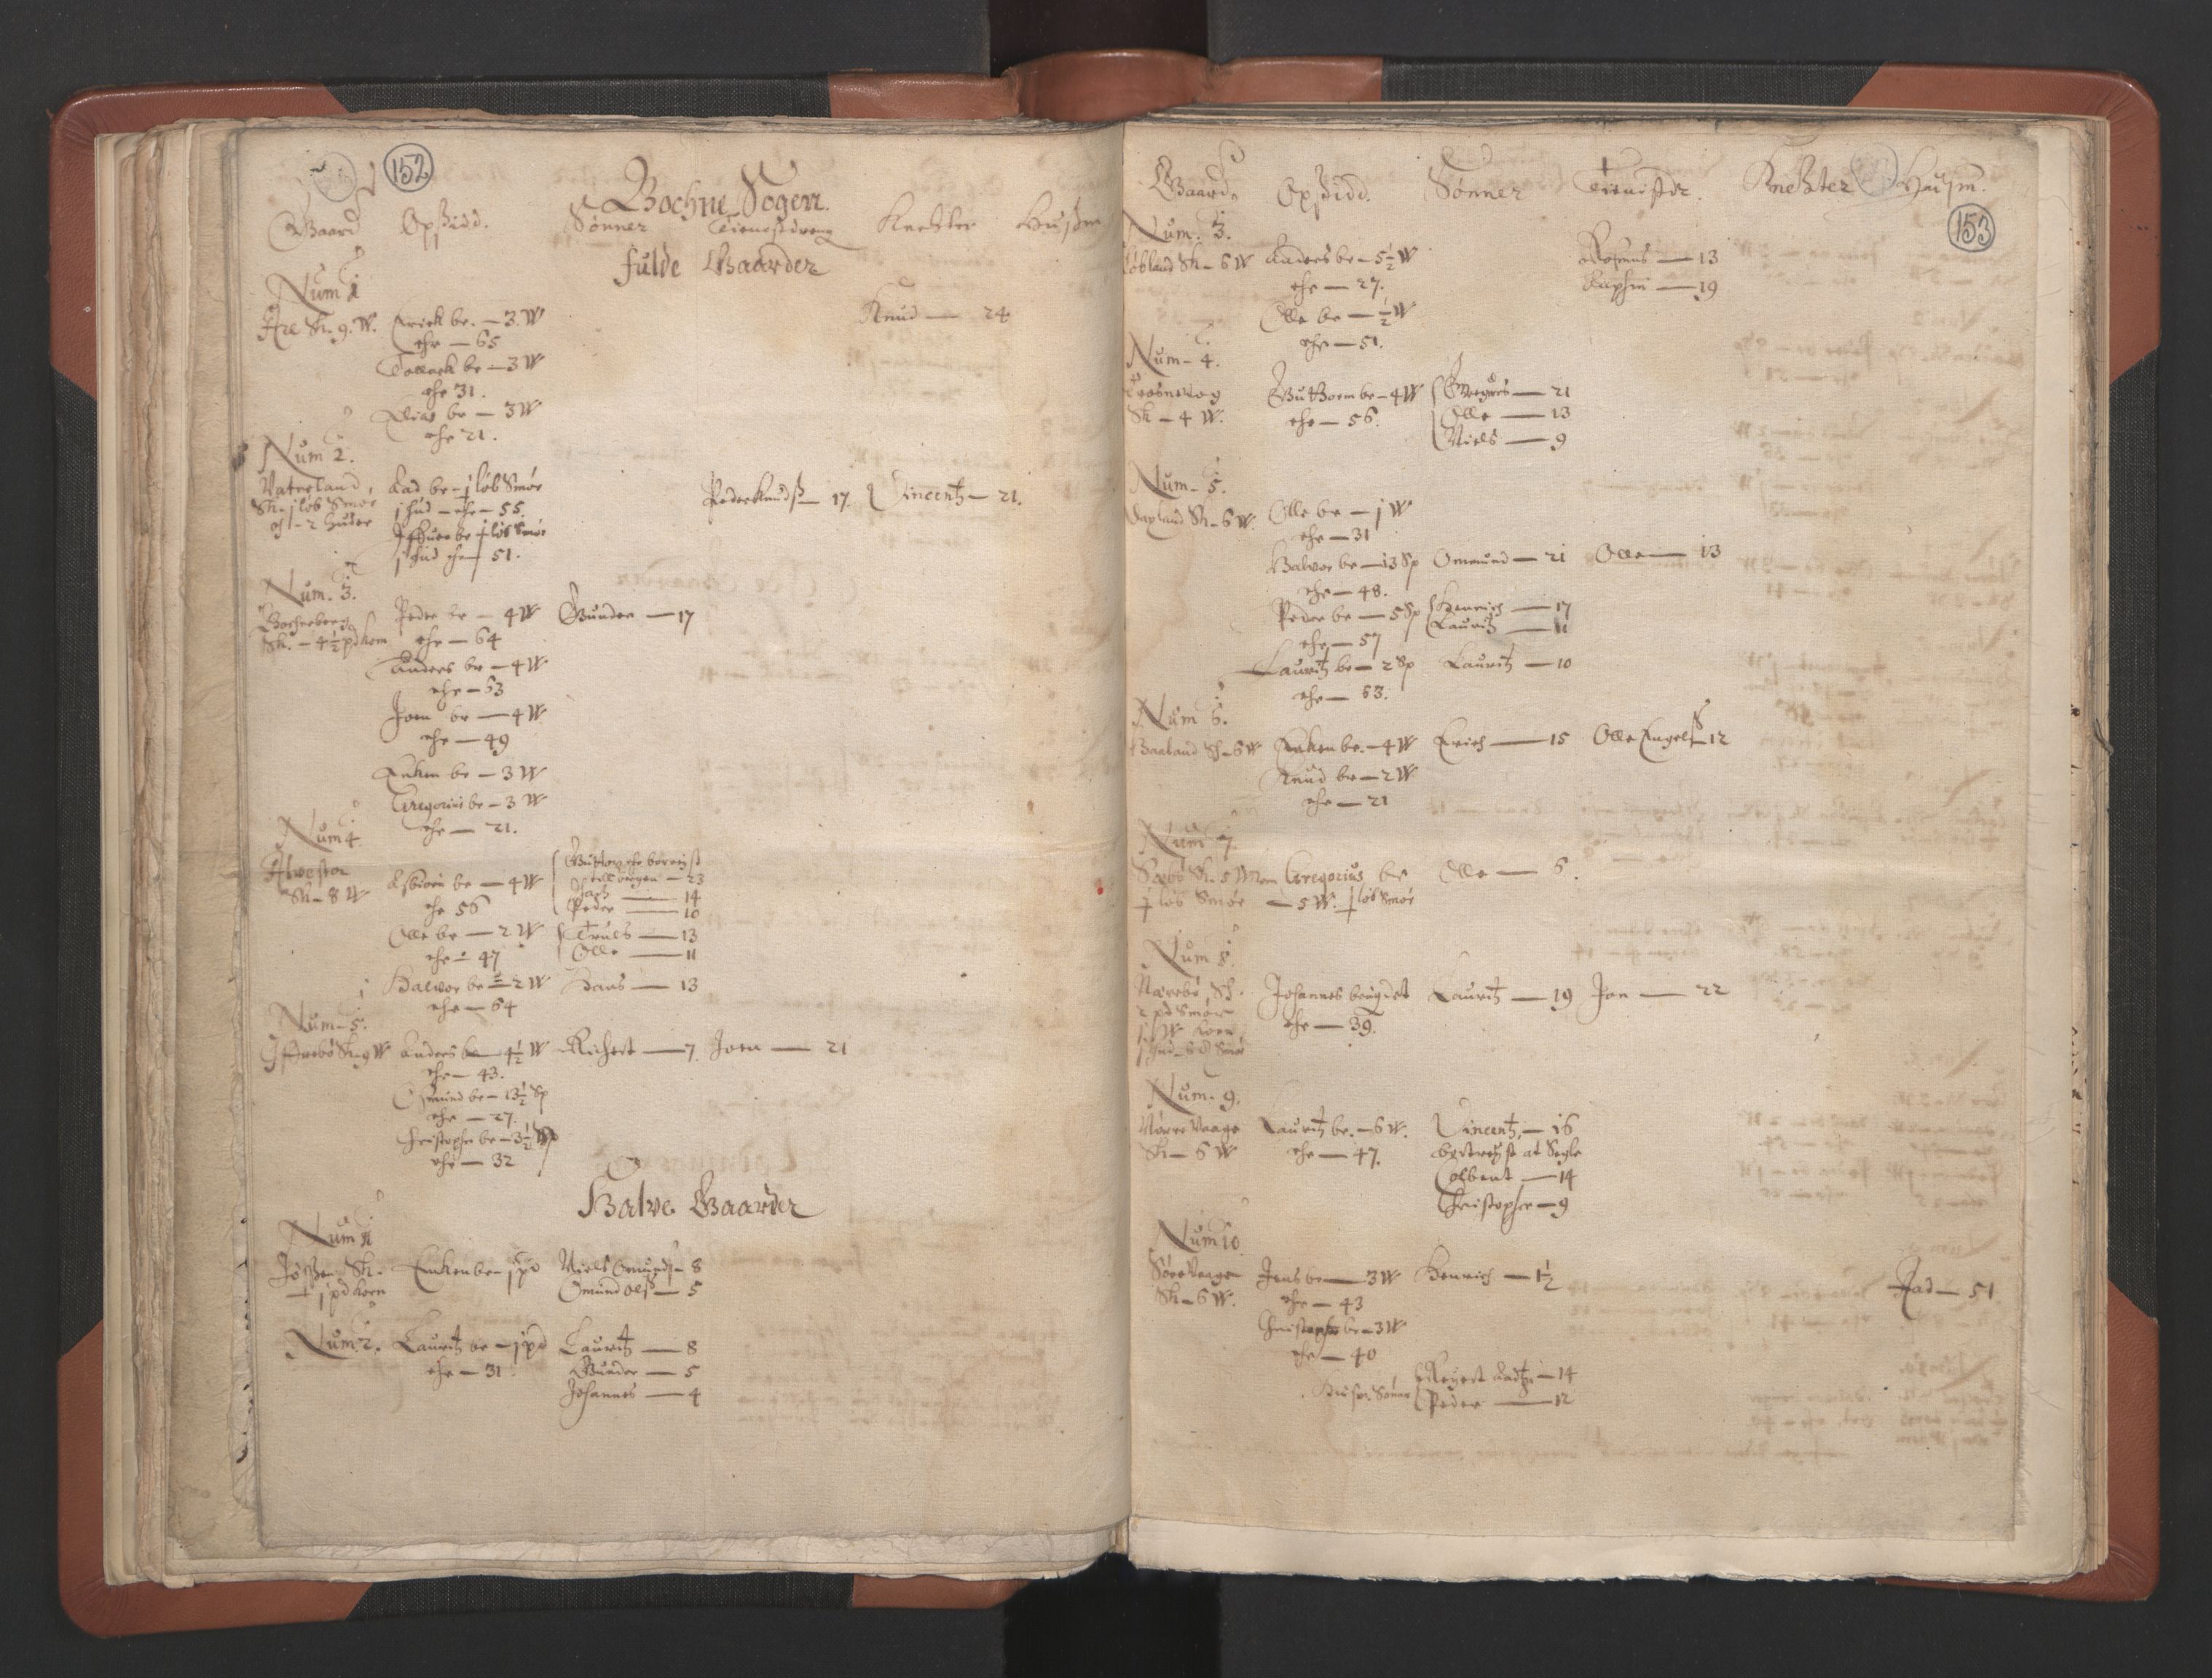 RA, Vicar's Census 1664-1666, no. 18: Stavanger deanery and Karmsund deanery, 1664-1666, p. 152-153